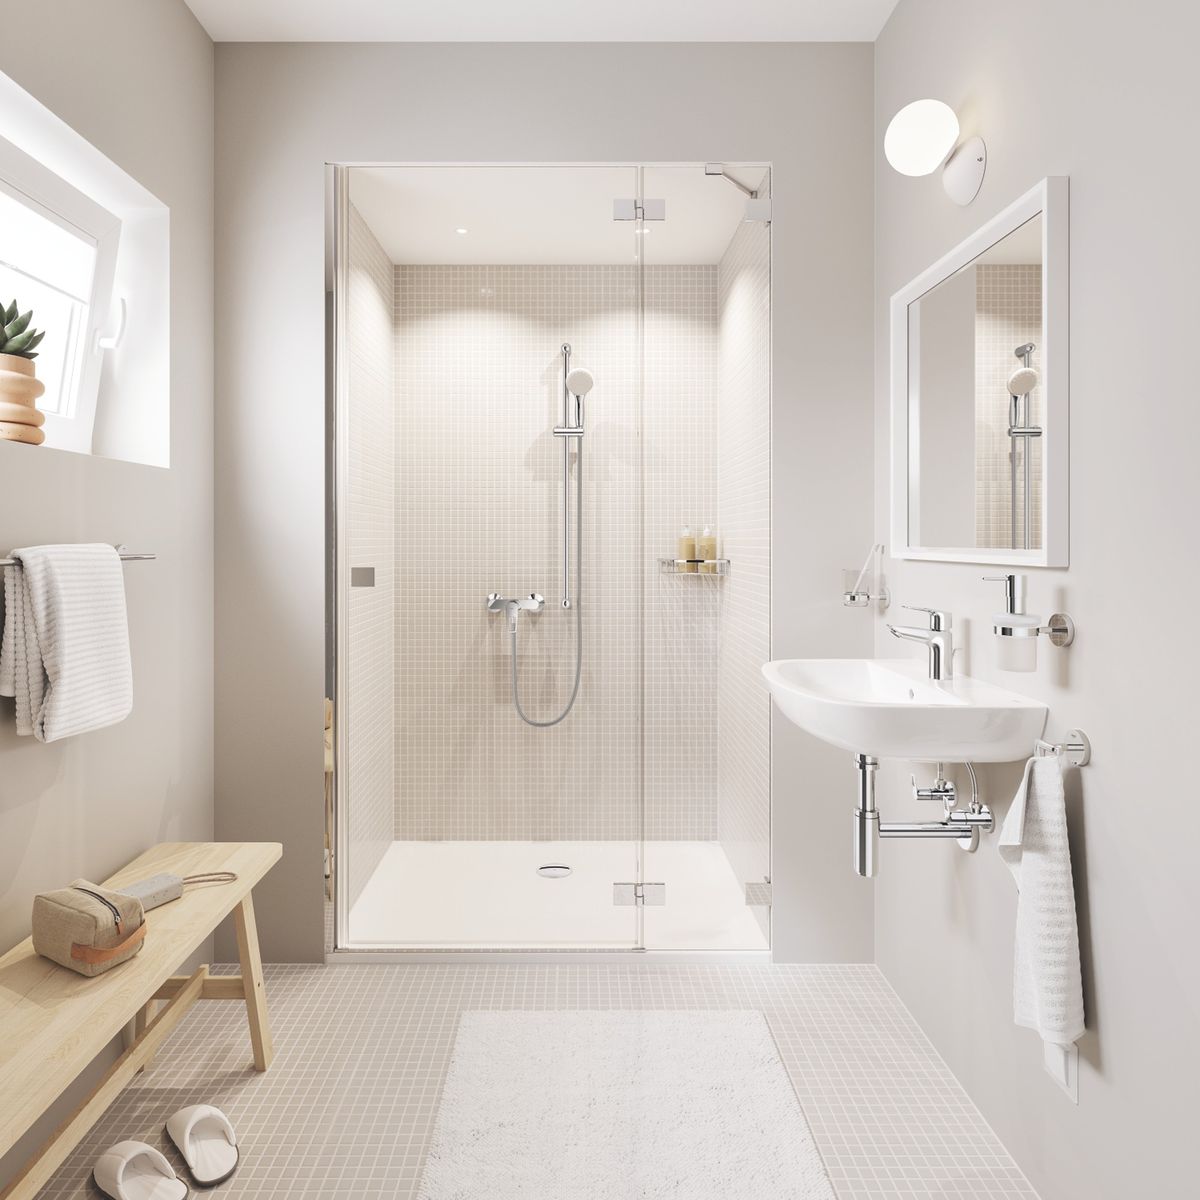 It’s official – bathroom layouts are set to see this major change in 2023